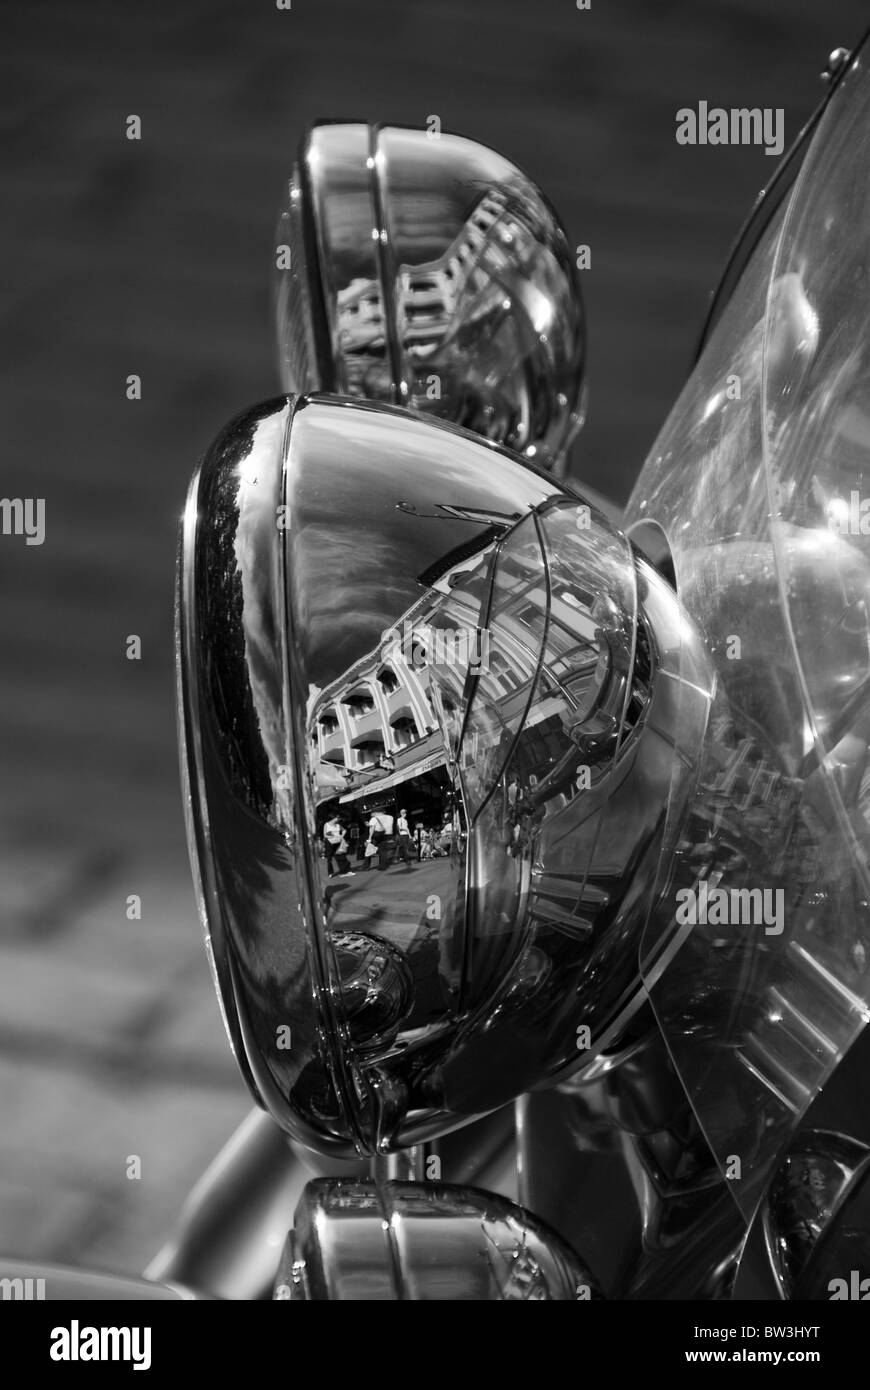 Motorbike Lamp City Reflection in a Street of Oslo, Norway Stock Photo